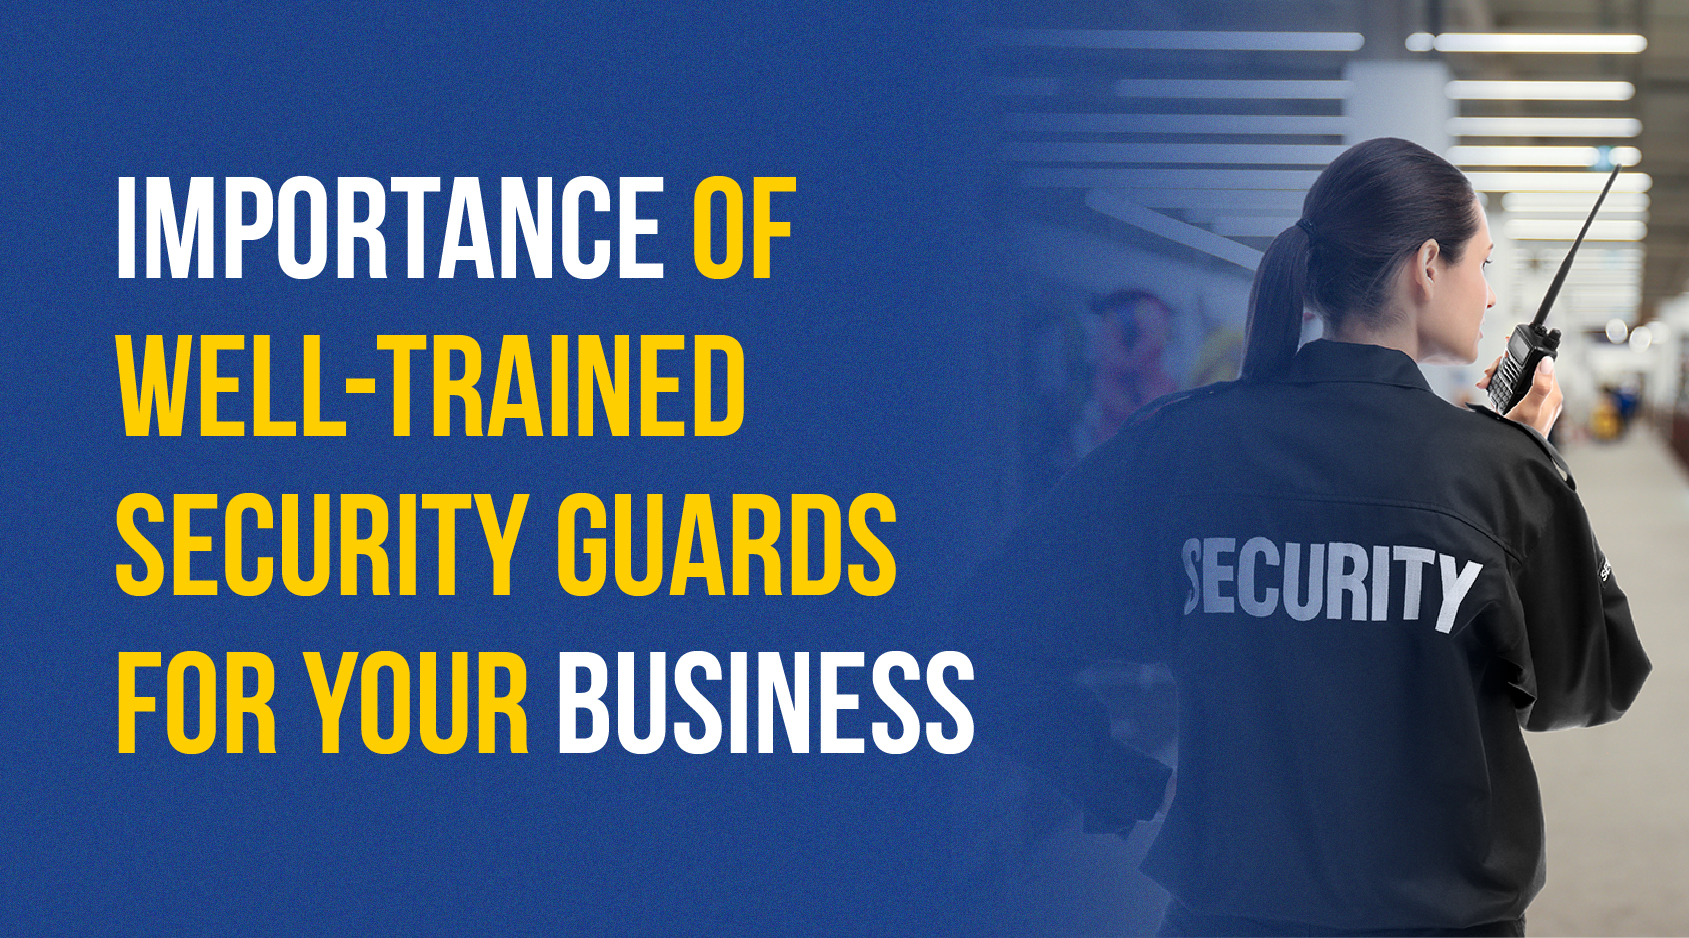 Importance of well trained security guards for your business